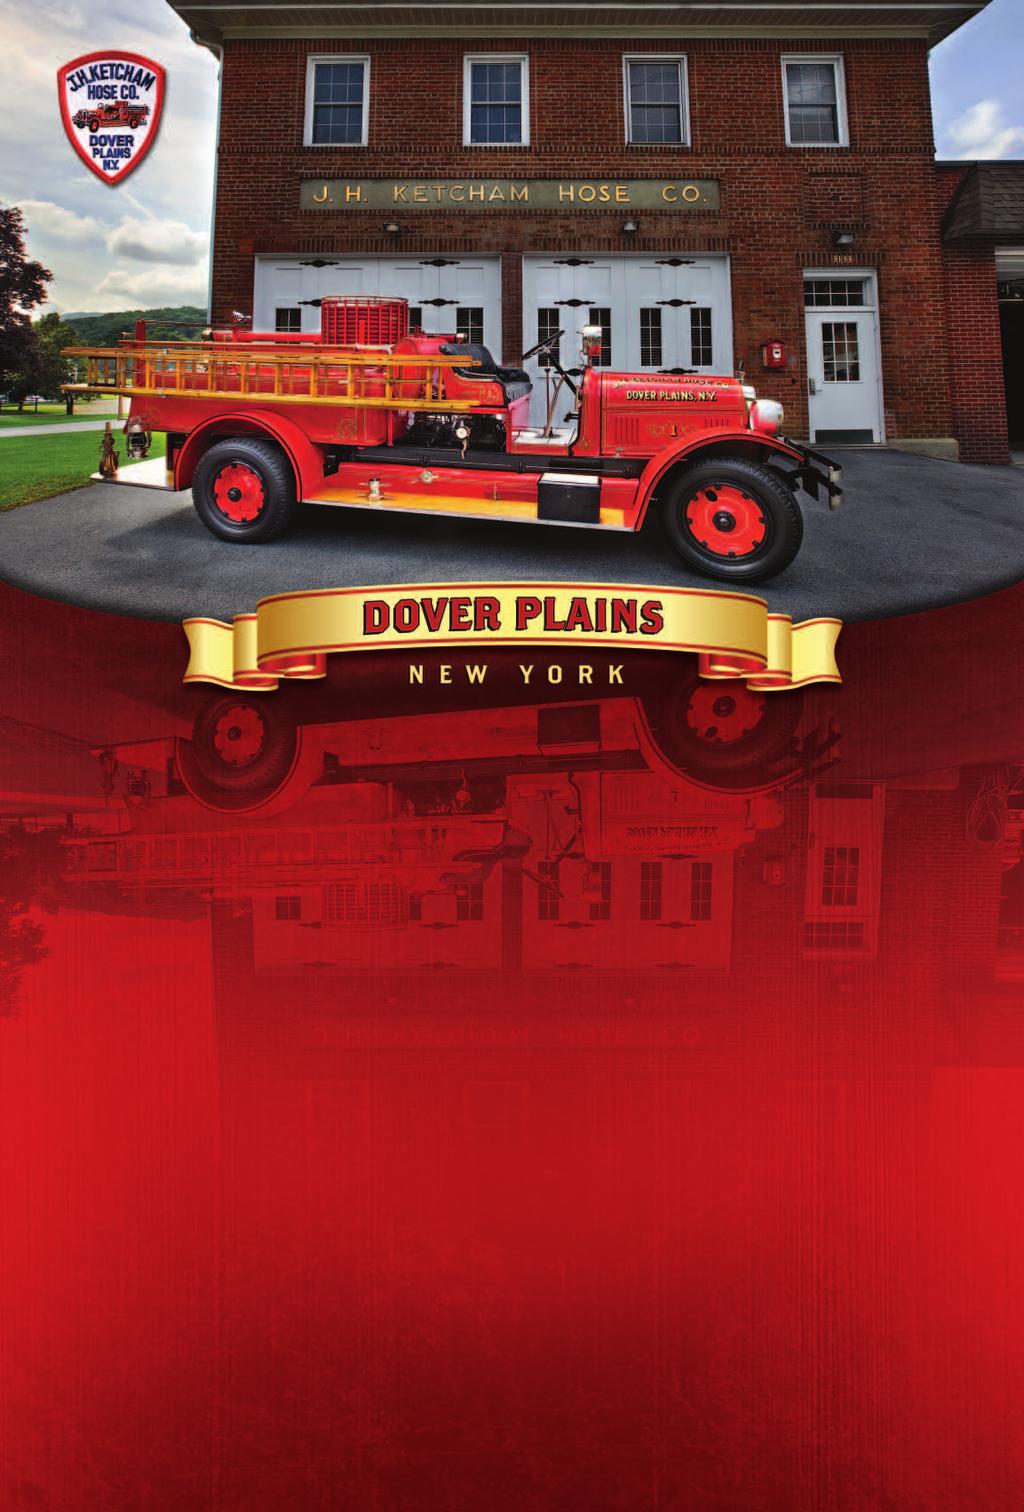 J.H. Ketcham Hose Company, Dover Volunteer Fire Department Proudly Serving the Dover Community Since 1903 MARCH FEBRUARY 1 2 3 4 5 6 7 8 9 10 11 12 13 14 15 16 17 18 19 20 21 22 23 24 25 26 27 28 29